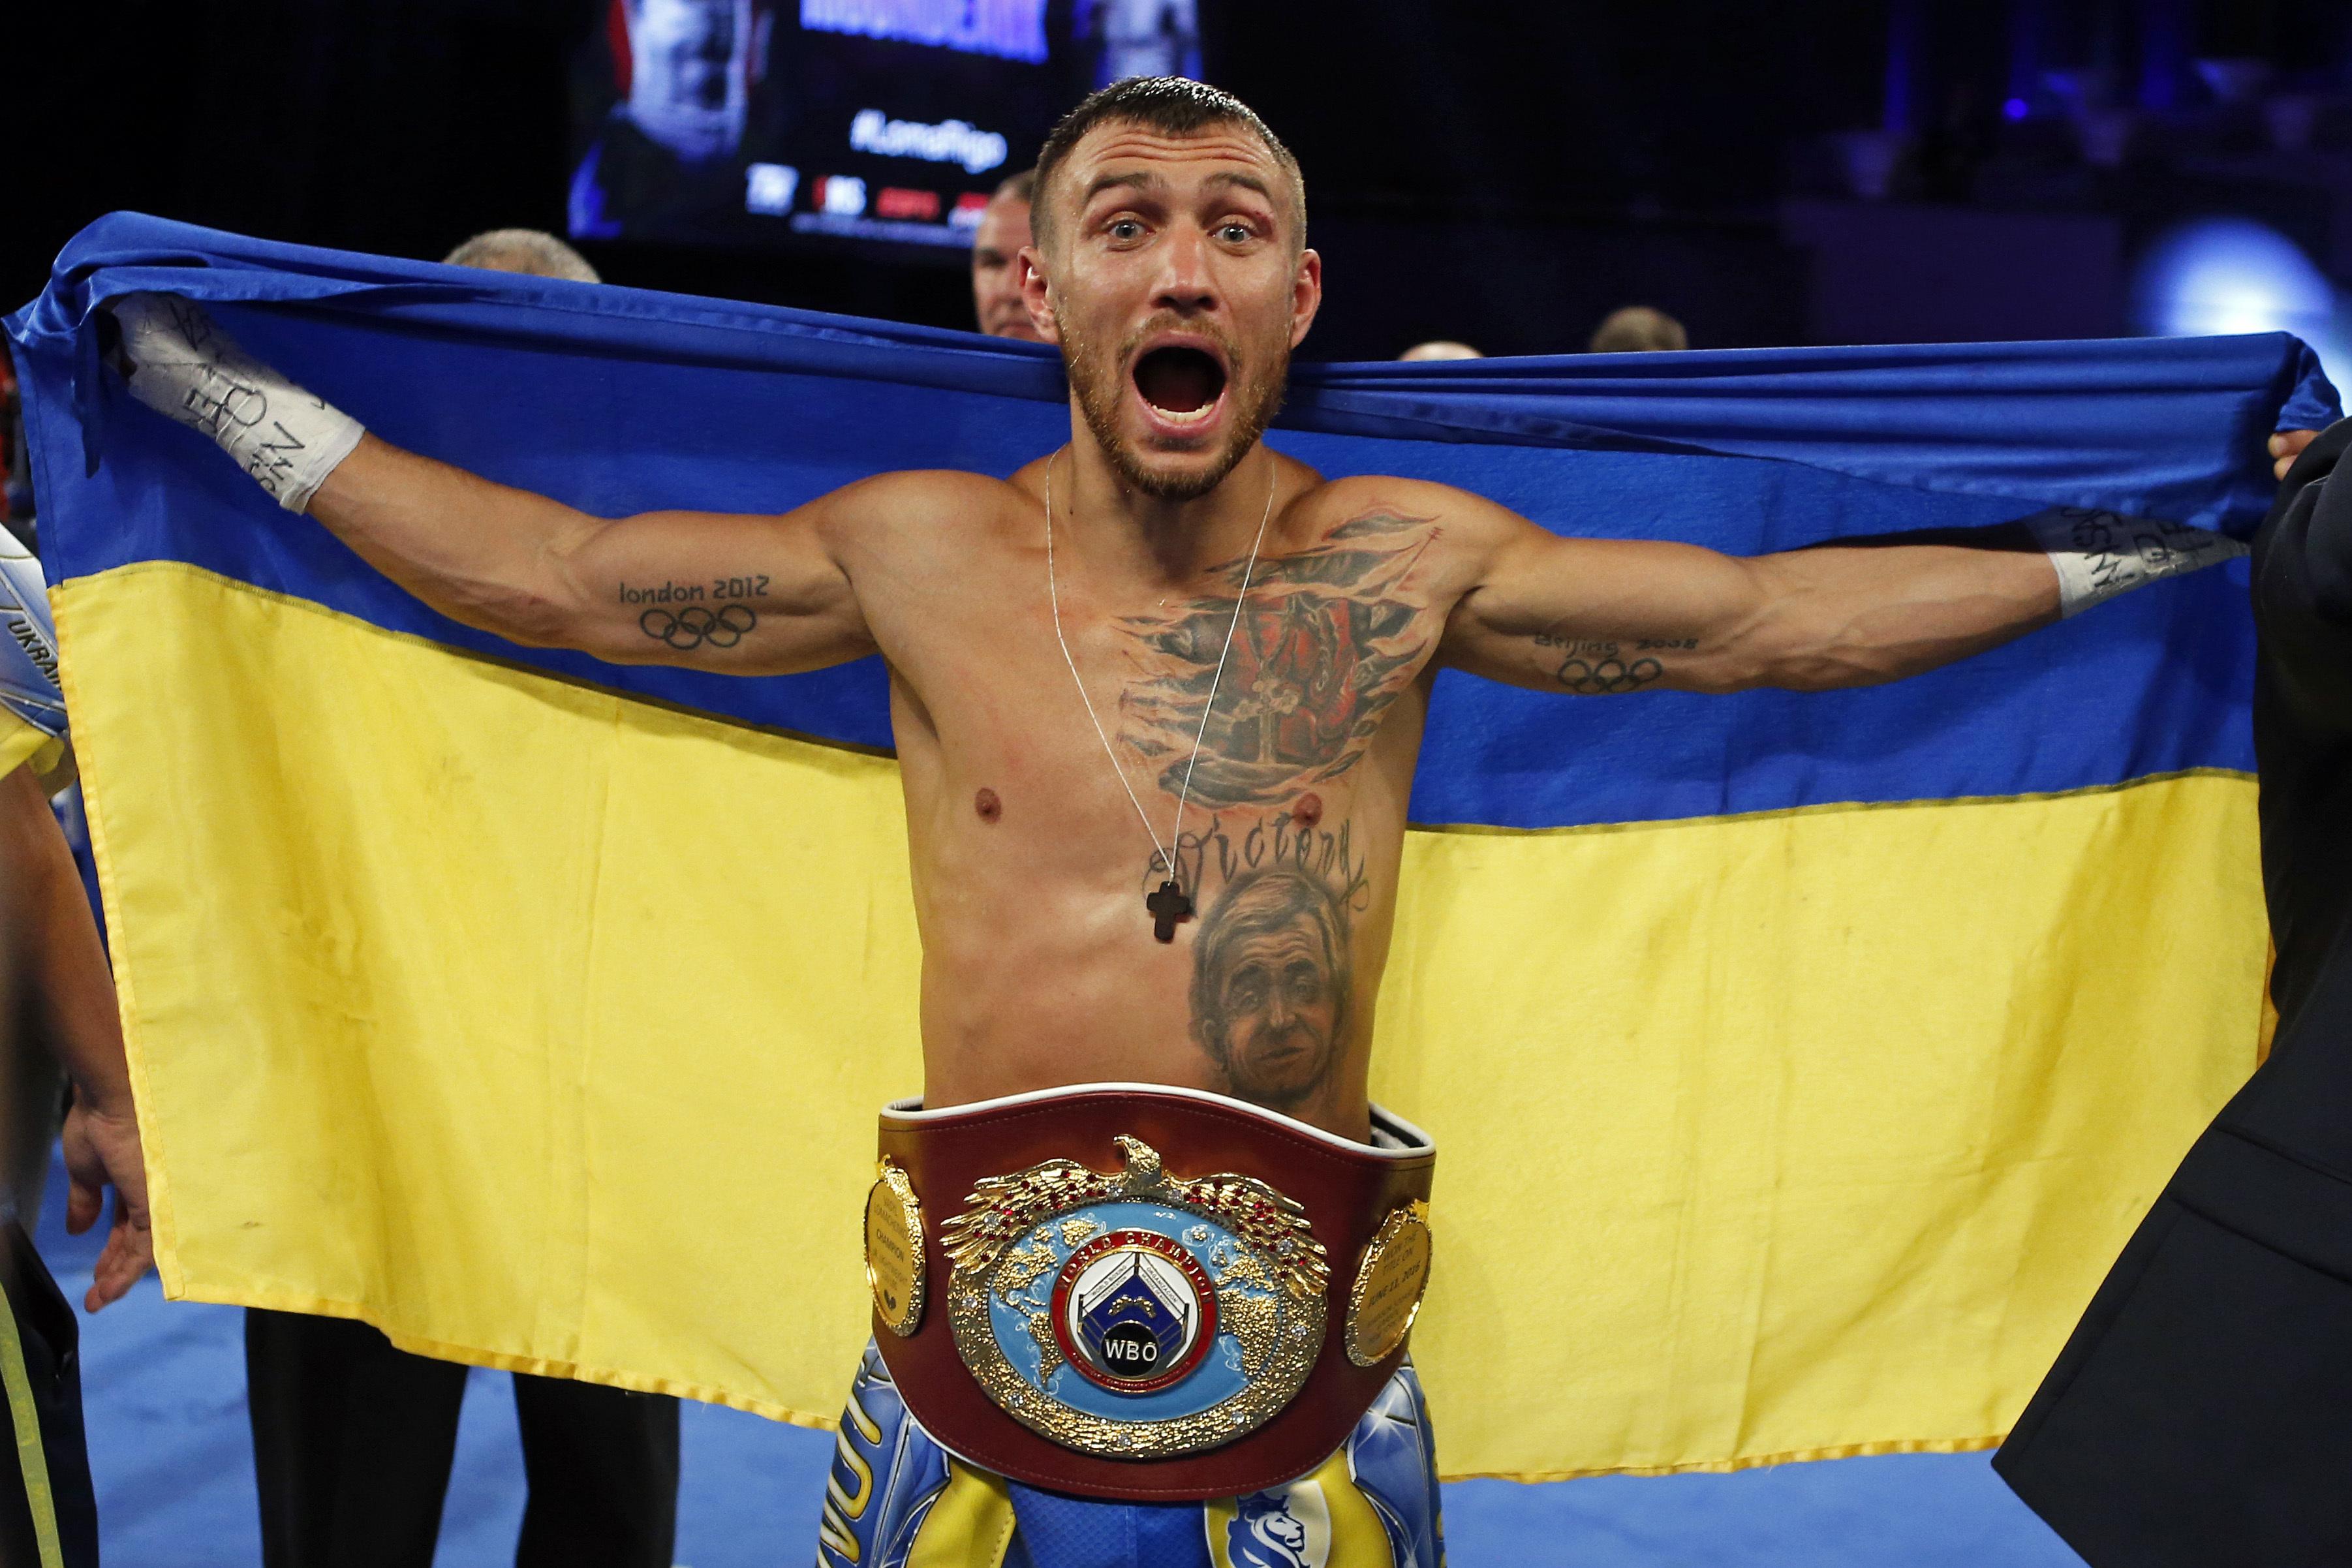 Vasyl Lomachenko stops Guillermo Rigondeaux to win match of Olympic